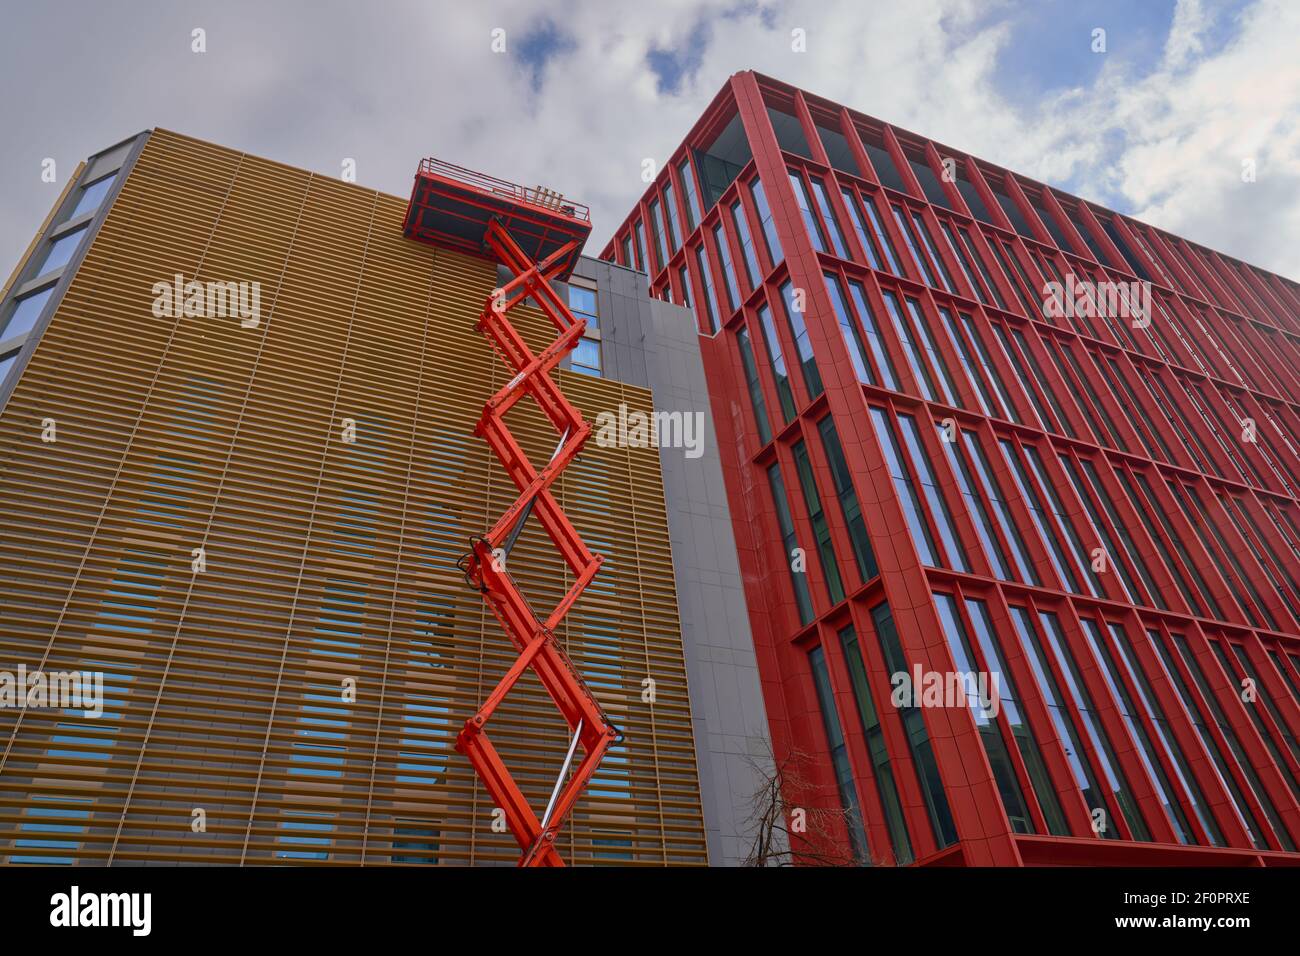 Large cherry picker platform on modern buildings in Manchester city centre Stock Photo